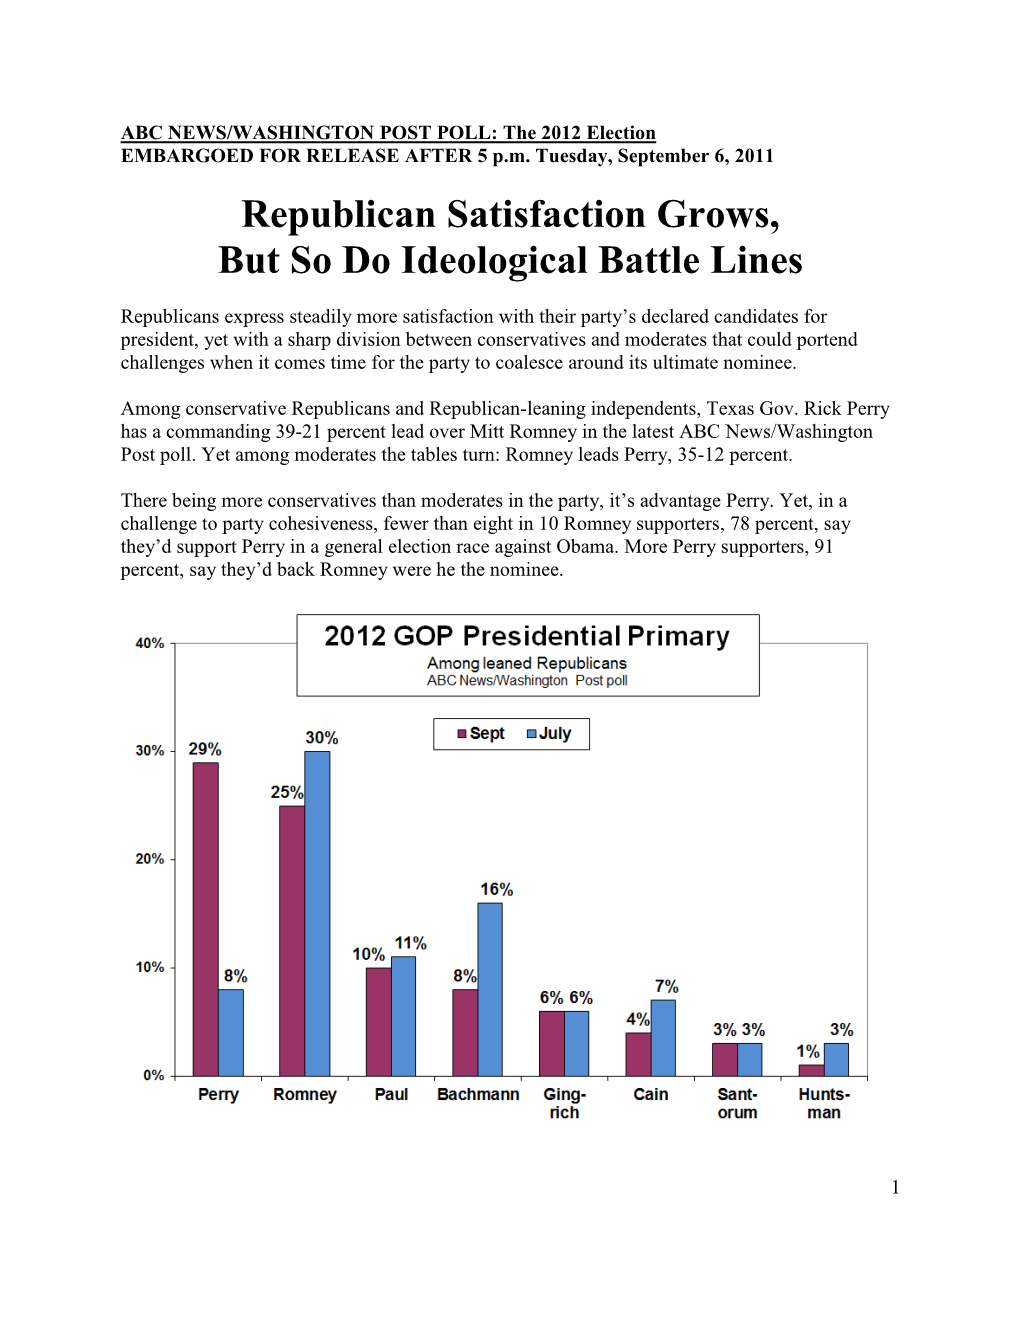 Republican Satisfaction Grows, but So Do Ideological Battle Lines